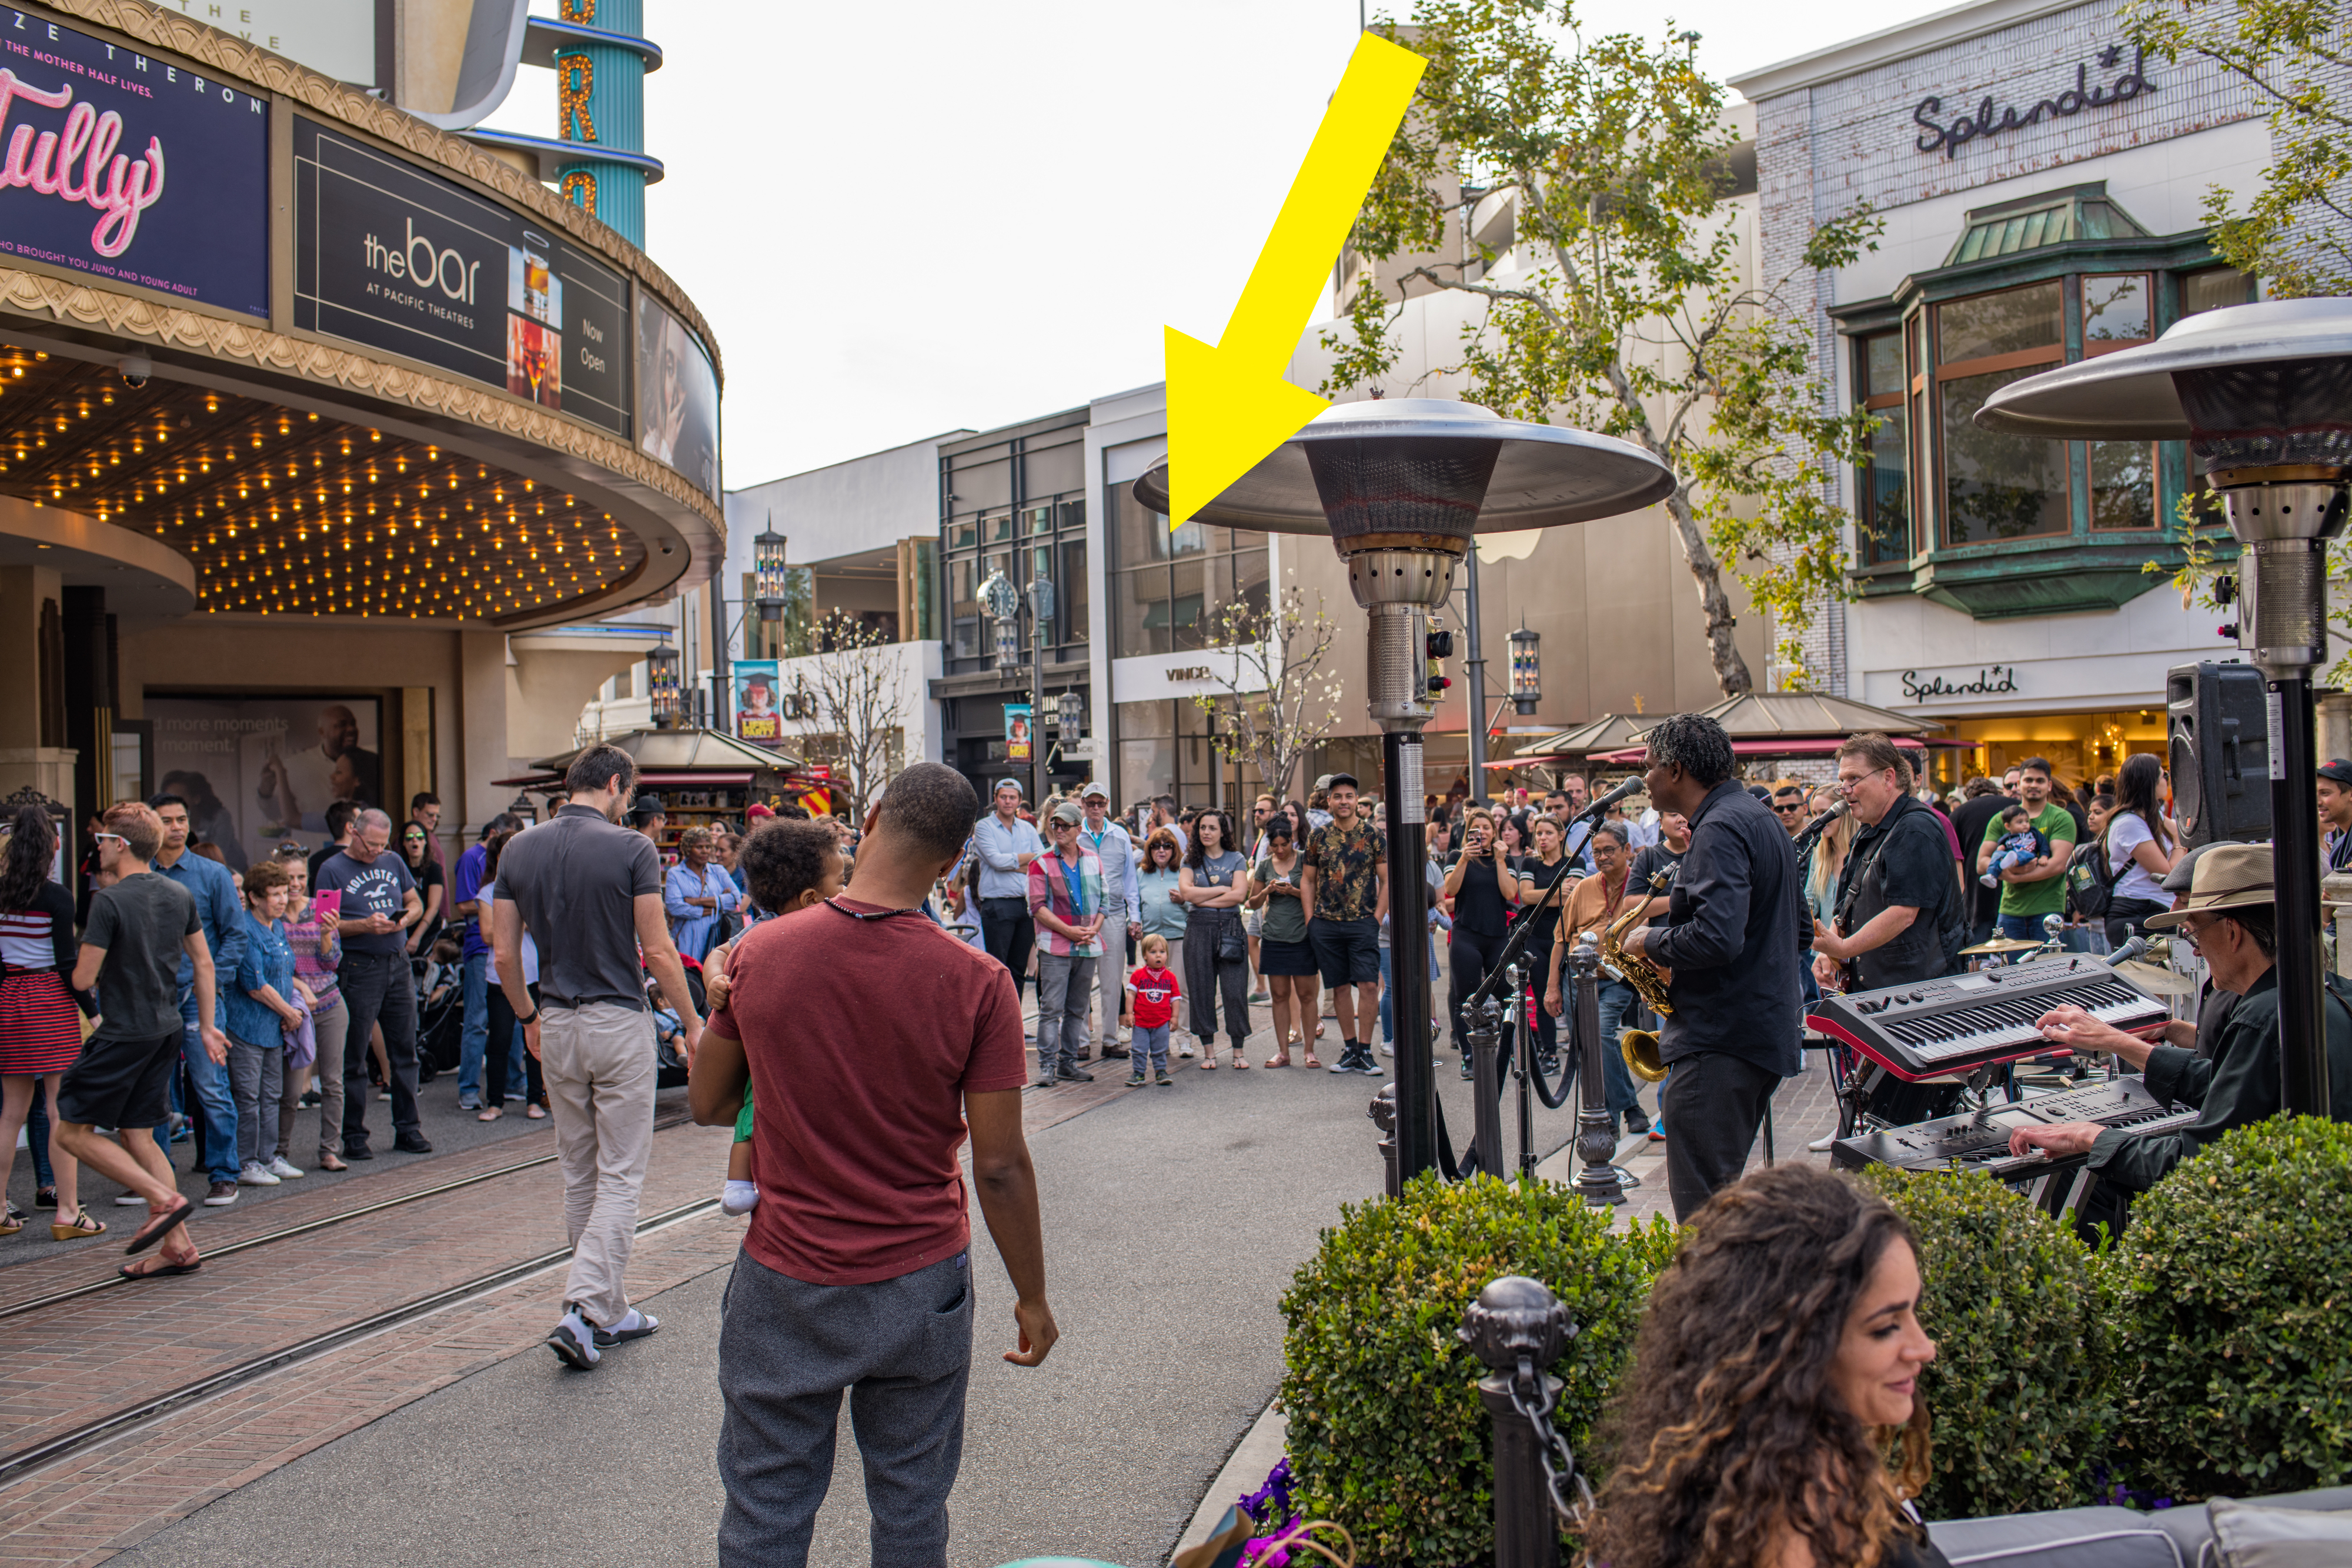 A crowd gathers around street musicians performing outside a theater. Restaurant signs and various shops are visible in the background